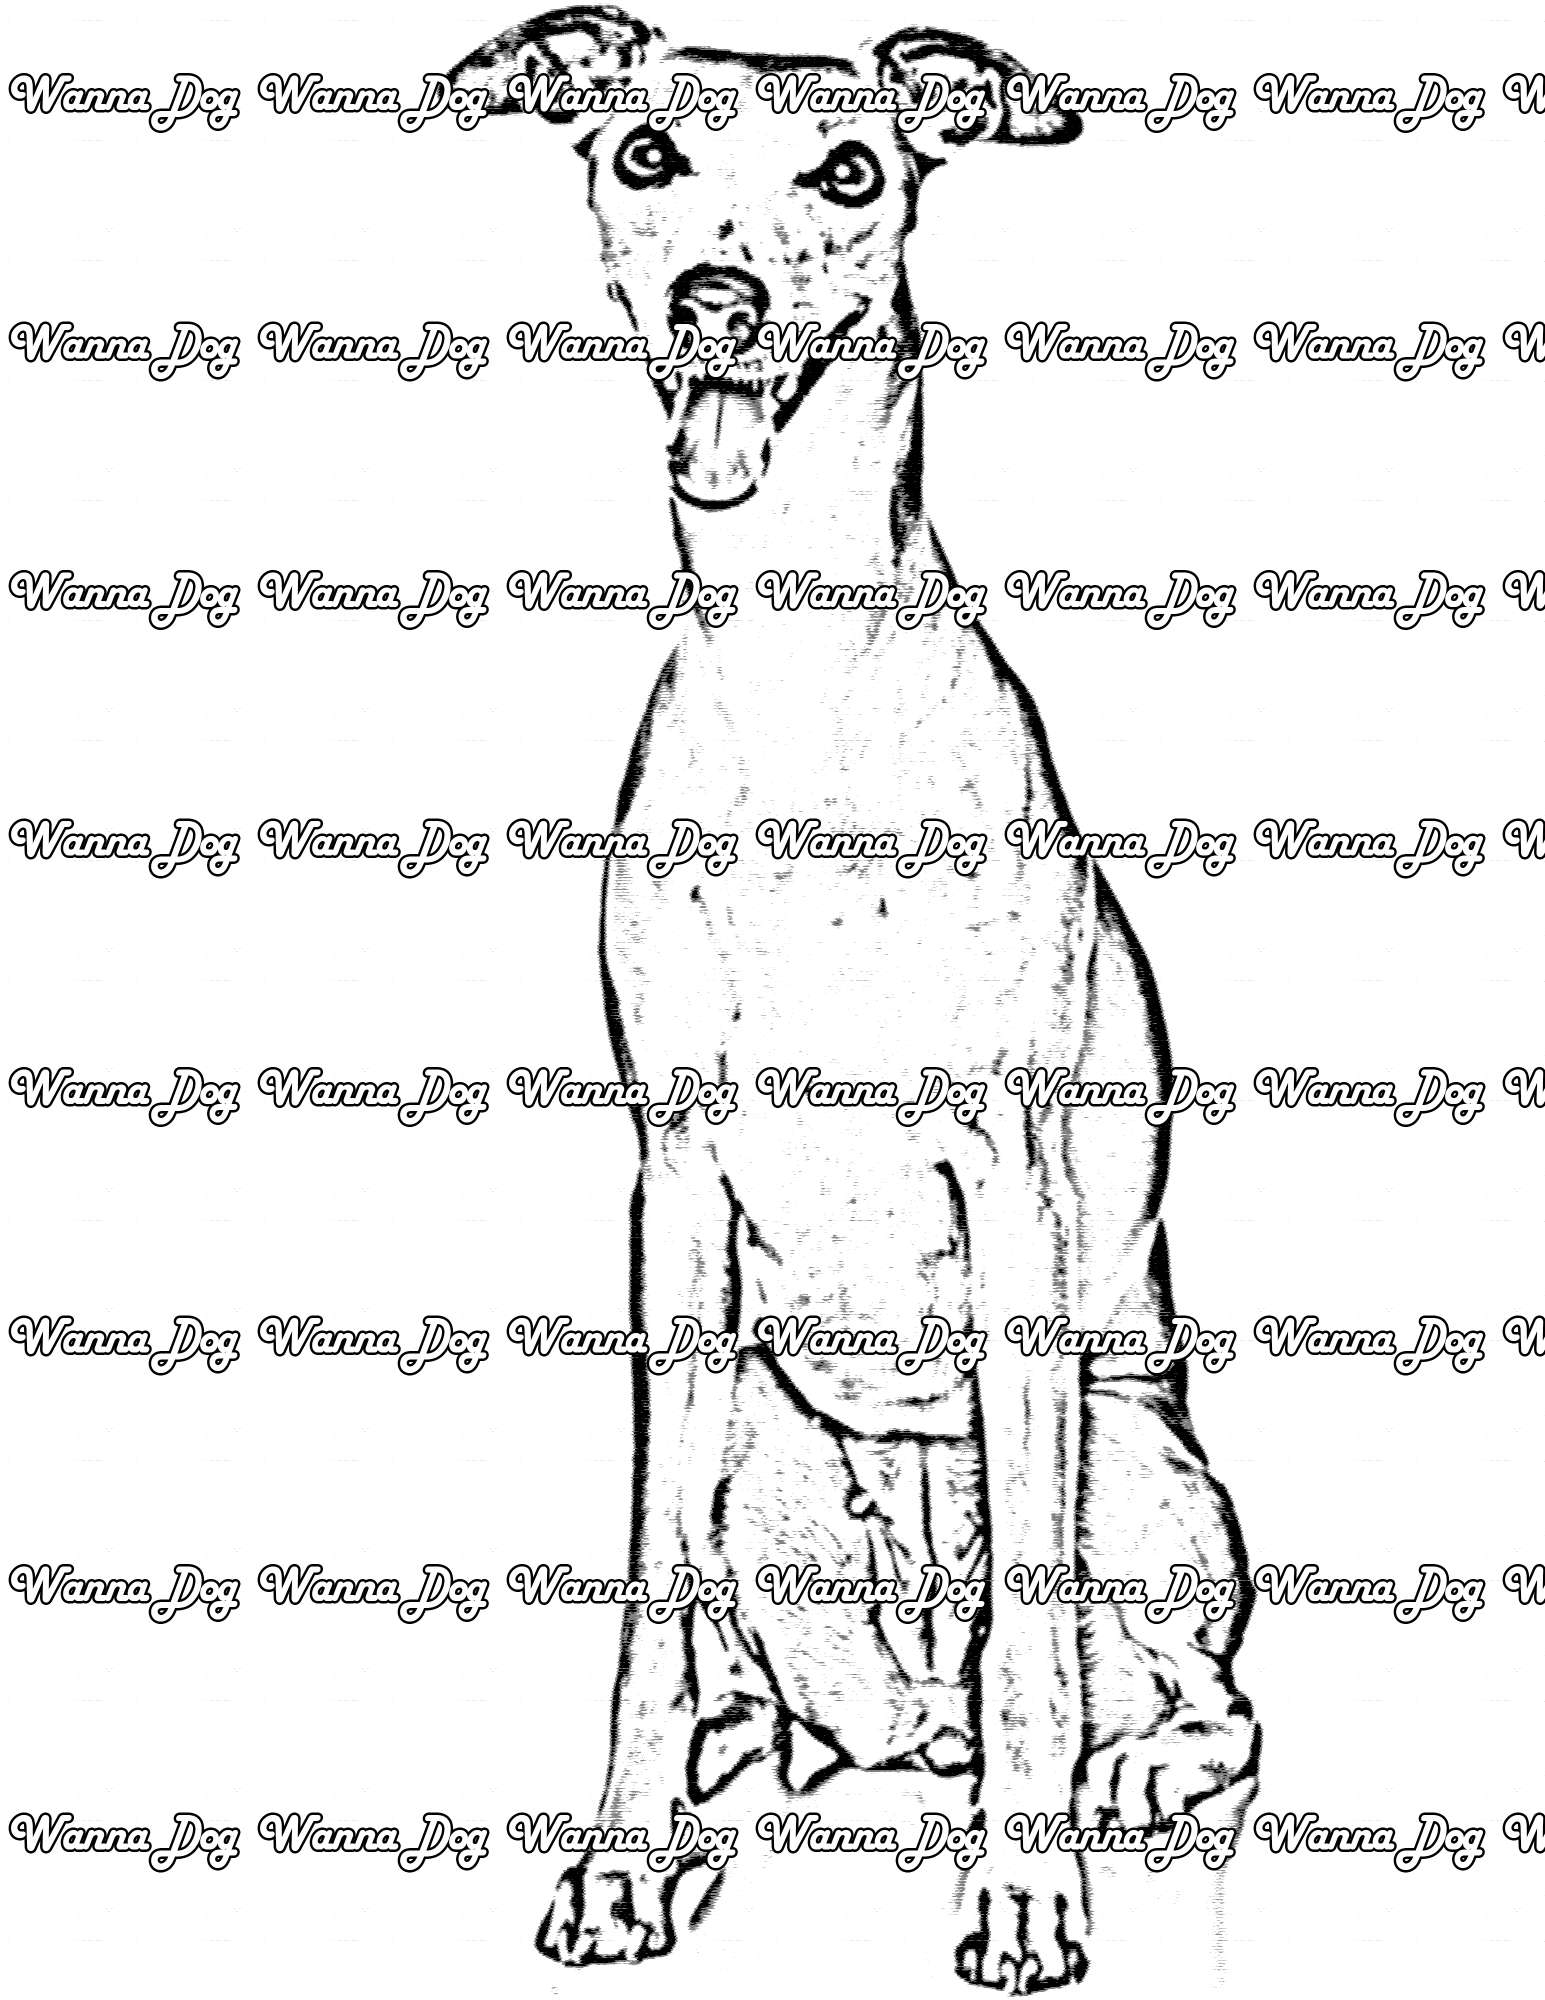 Greyhound Coloring Page of a Greyhound sitting with their tongue out